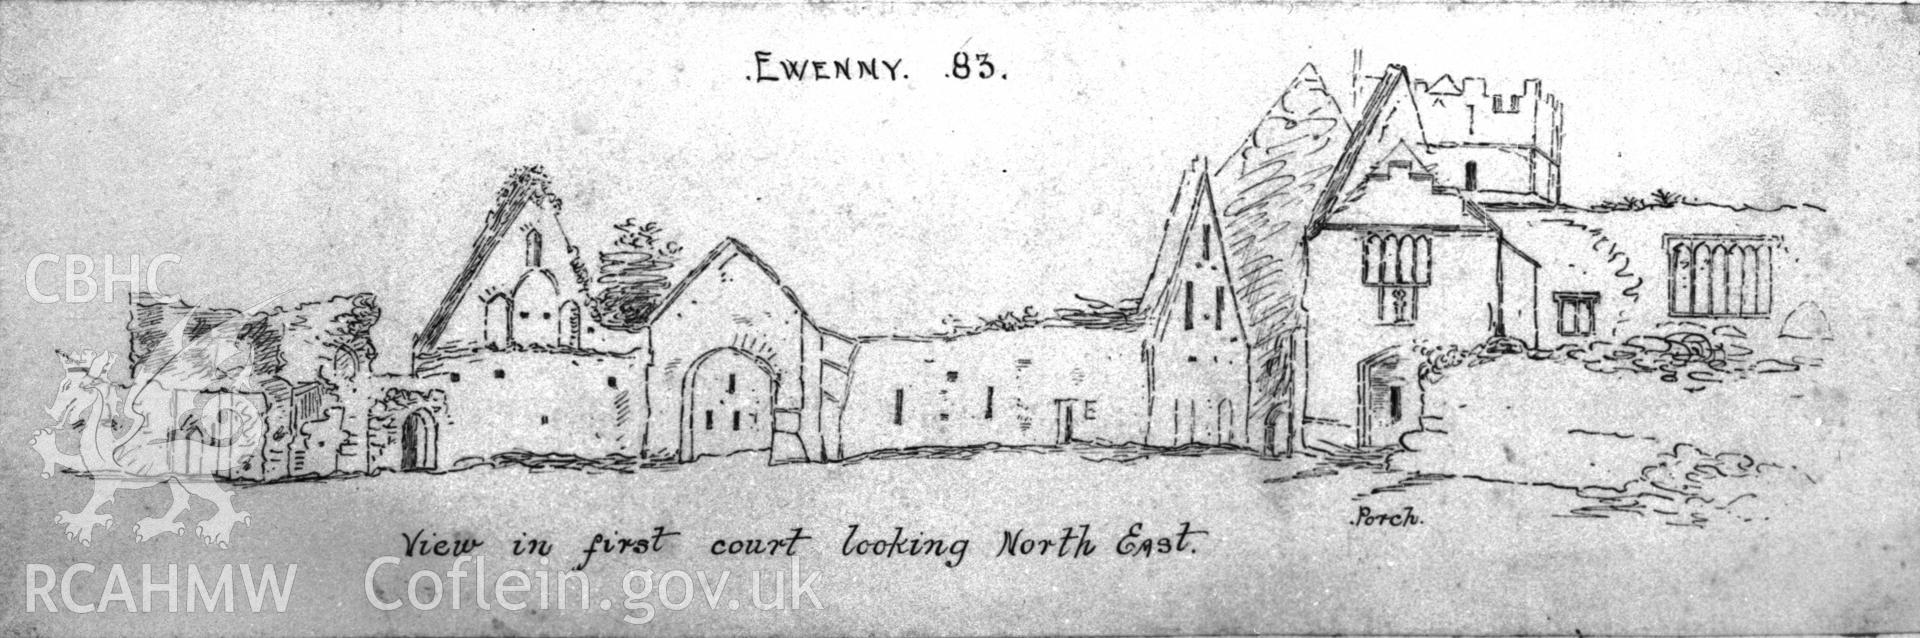 Sketch of view in the first court looking north east in Ewenny Priory, drawings in British Museum by architect J O S Richardson, copied from 1804 Carters. Acetate.